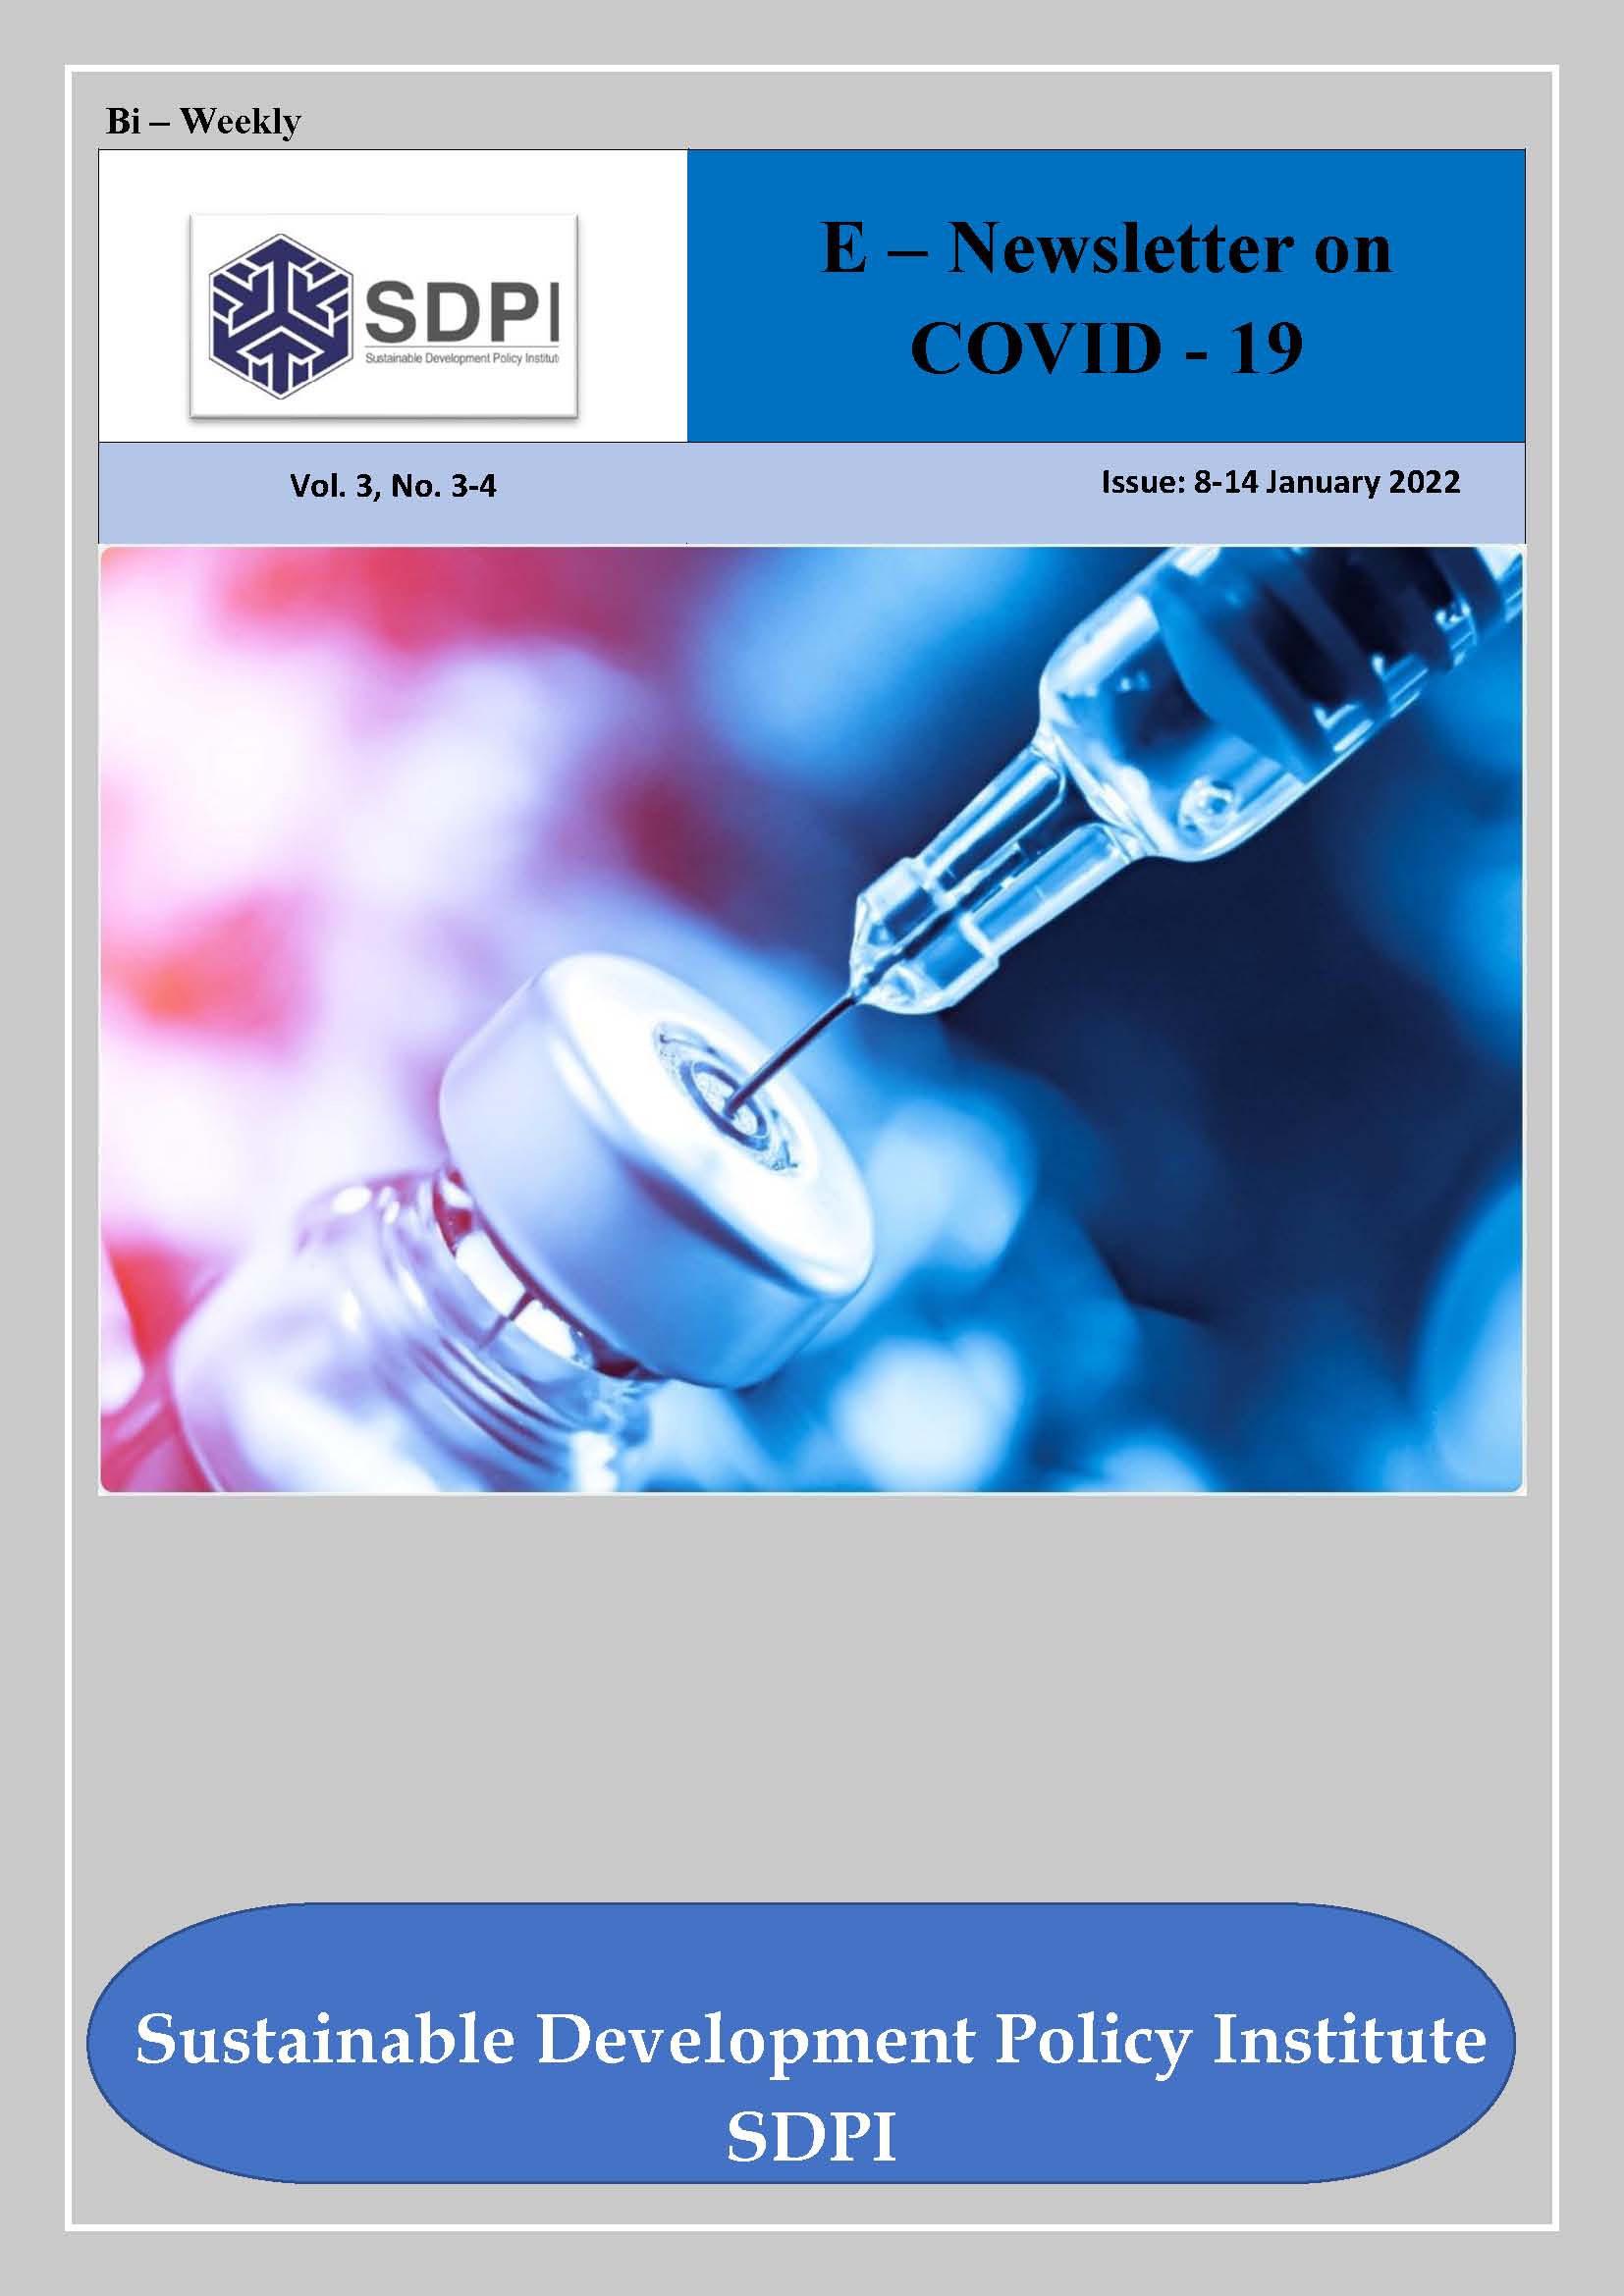 E-Newsletter on COVID-19 Vol. 3, No. 3-4, Issue 8-14 January 2022